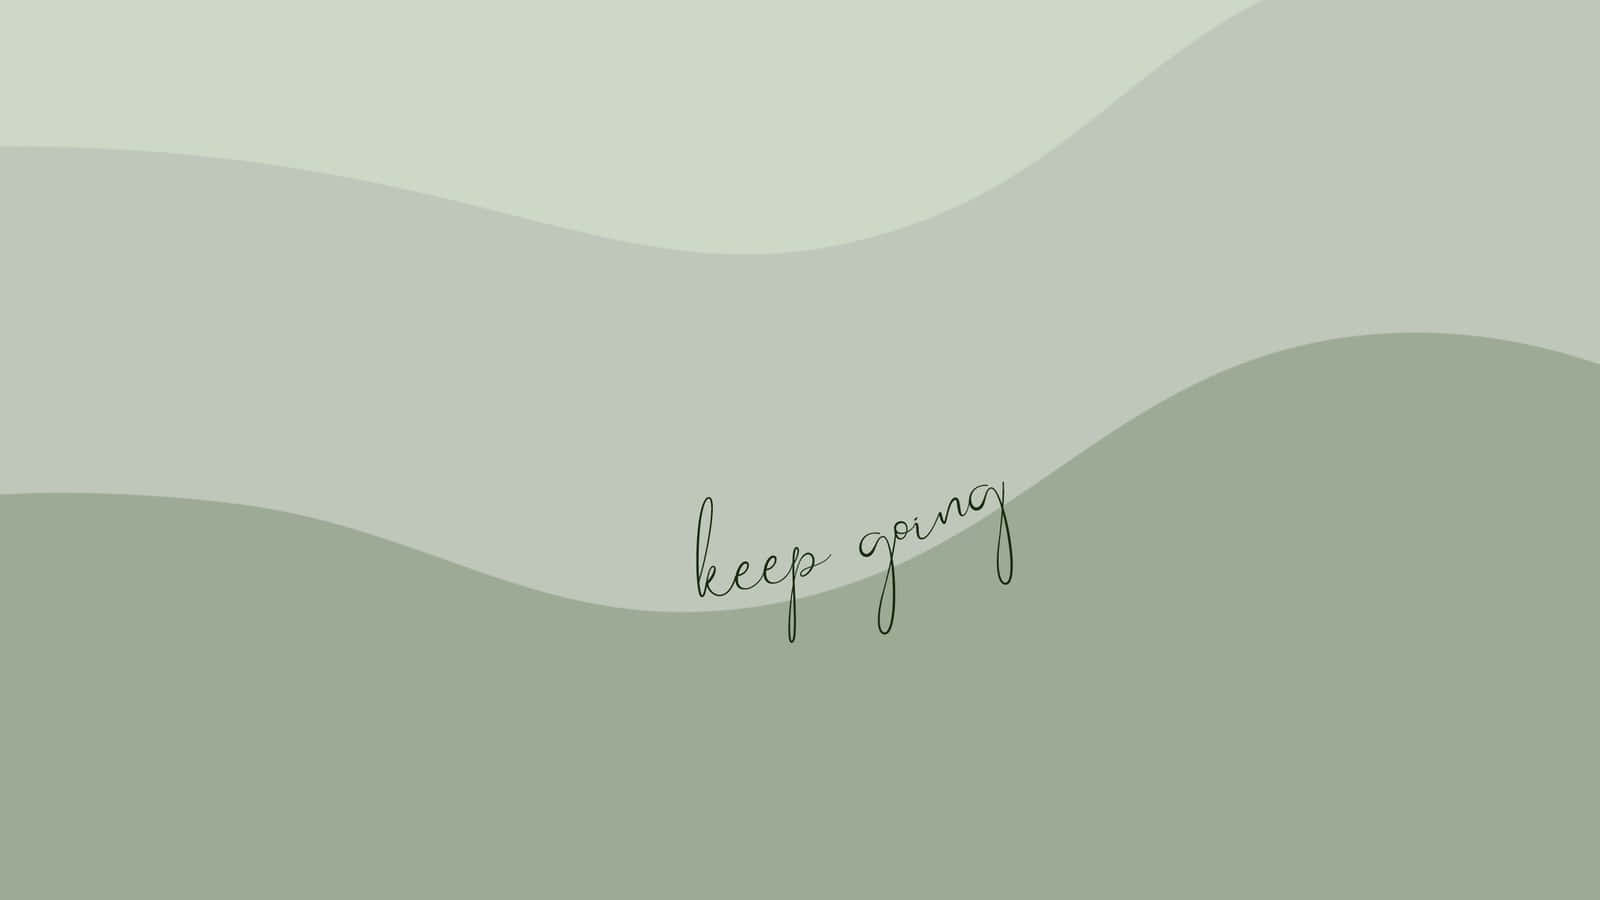 Keep going - don't let adversity stop you. Wallpaper